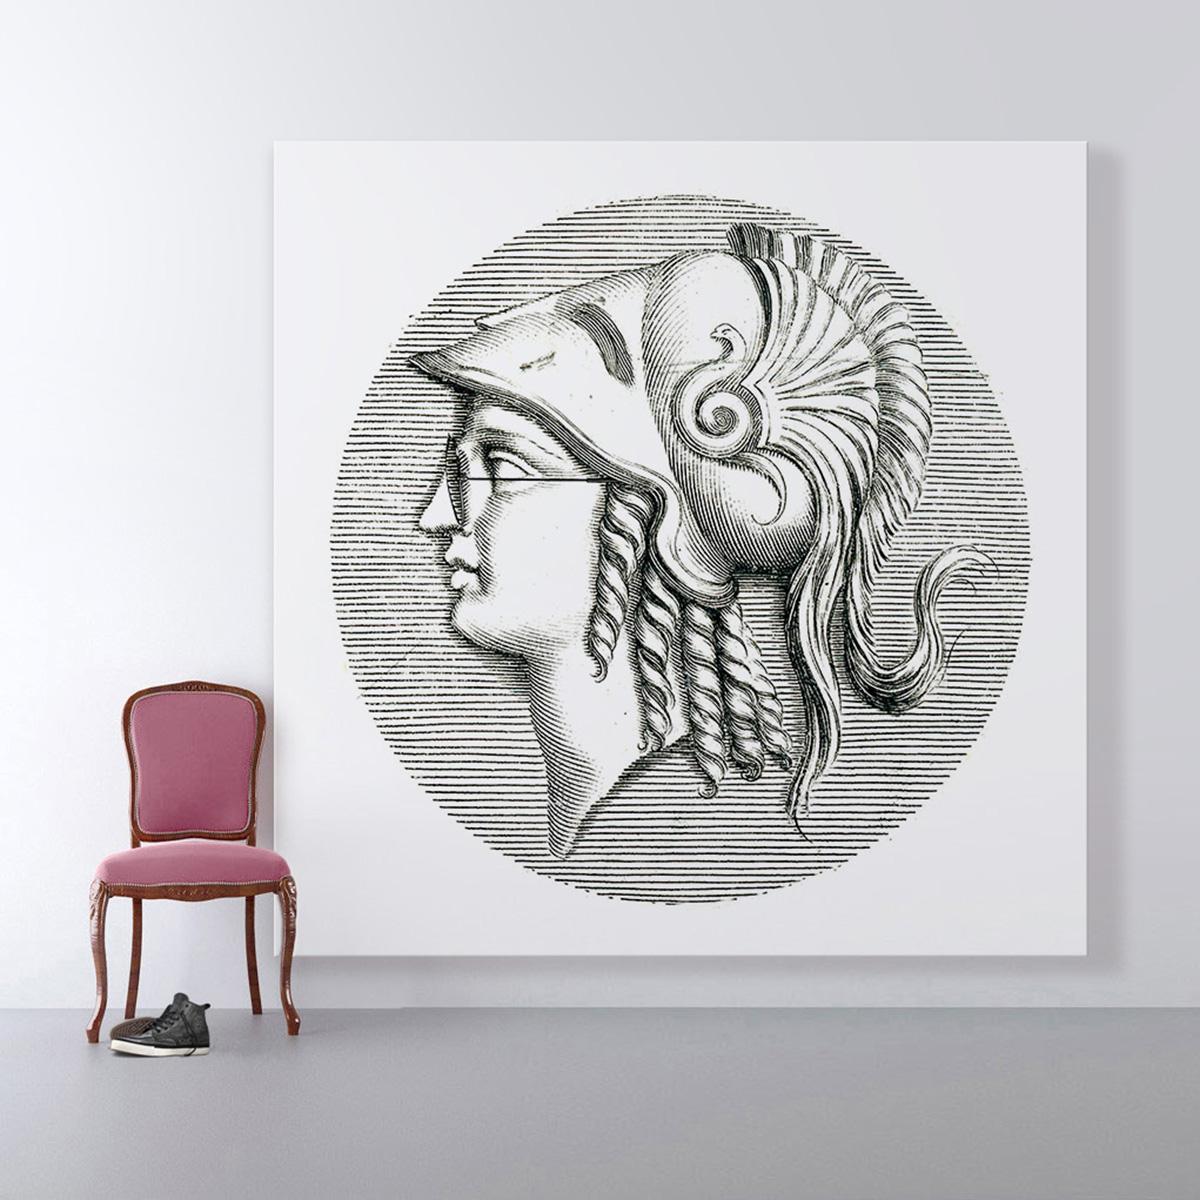 Decorative print featuring a montage of Alexander The Great using glasses.